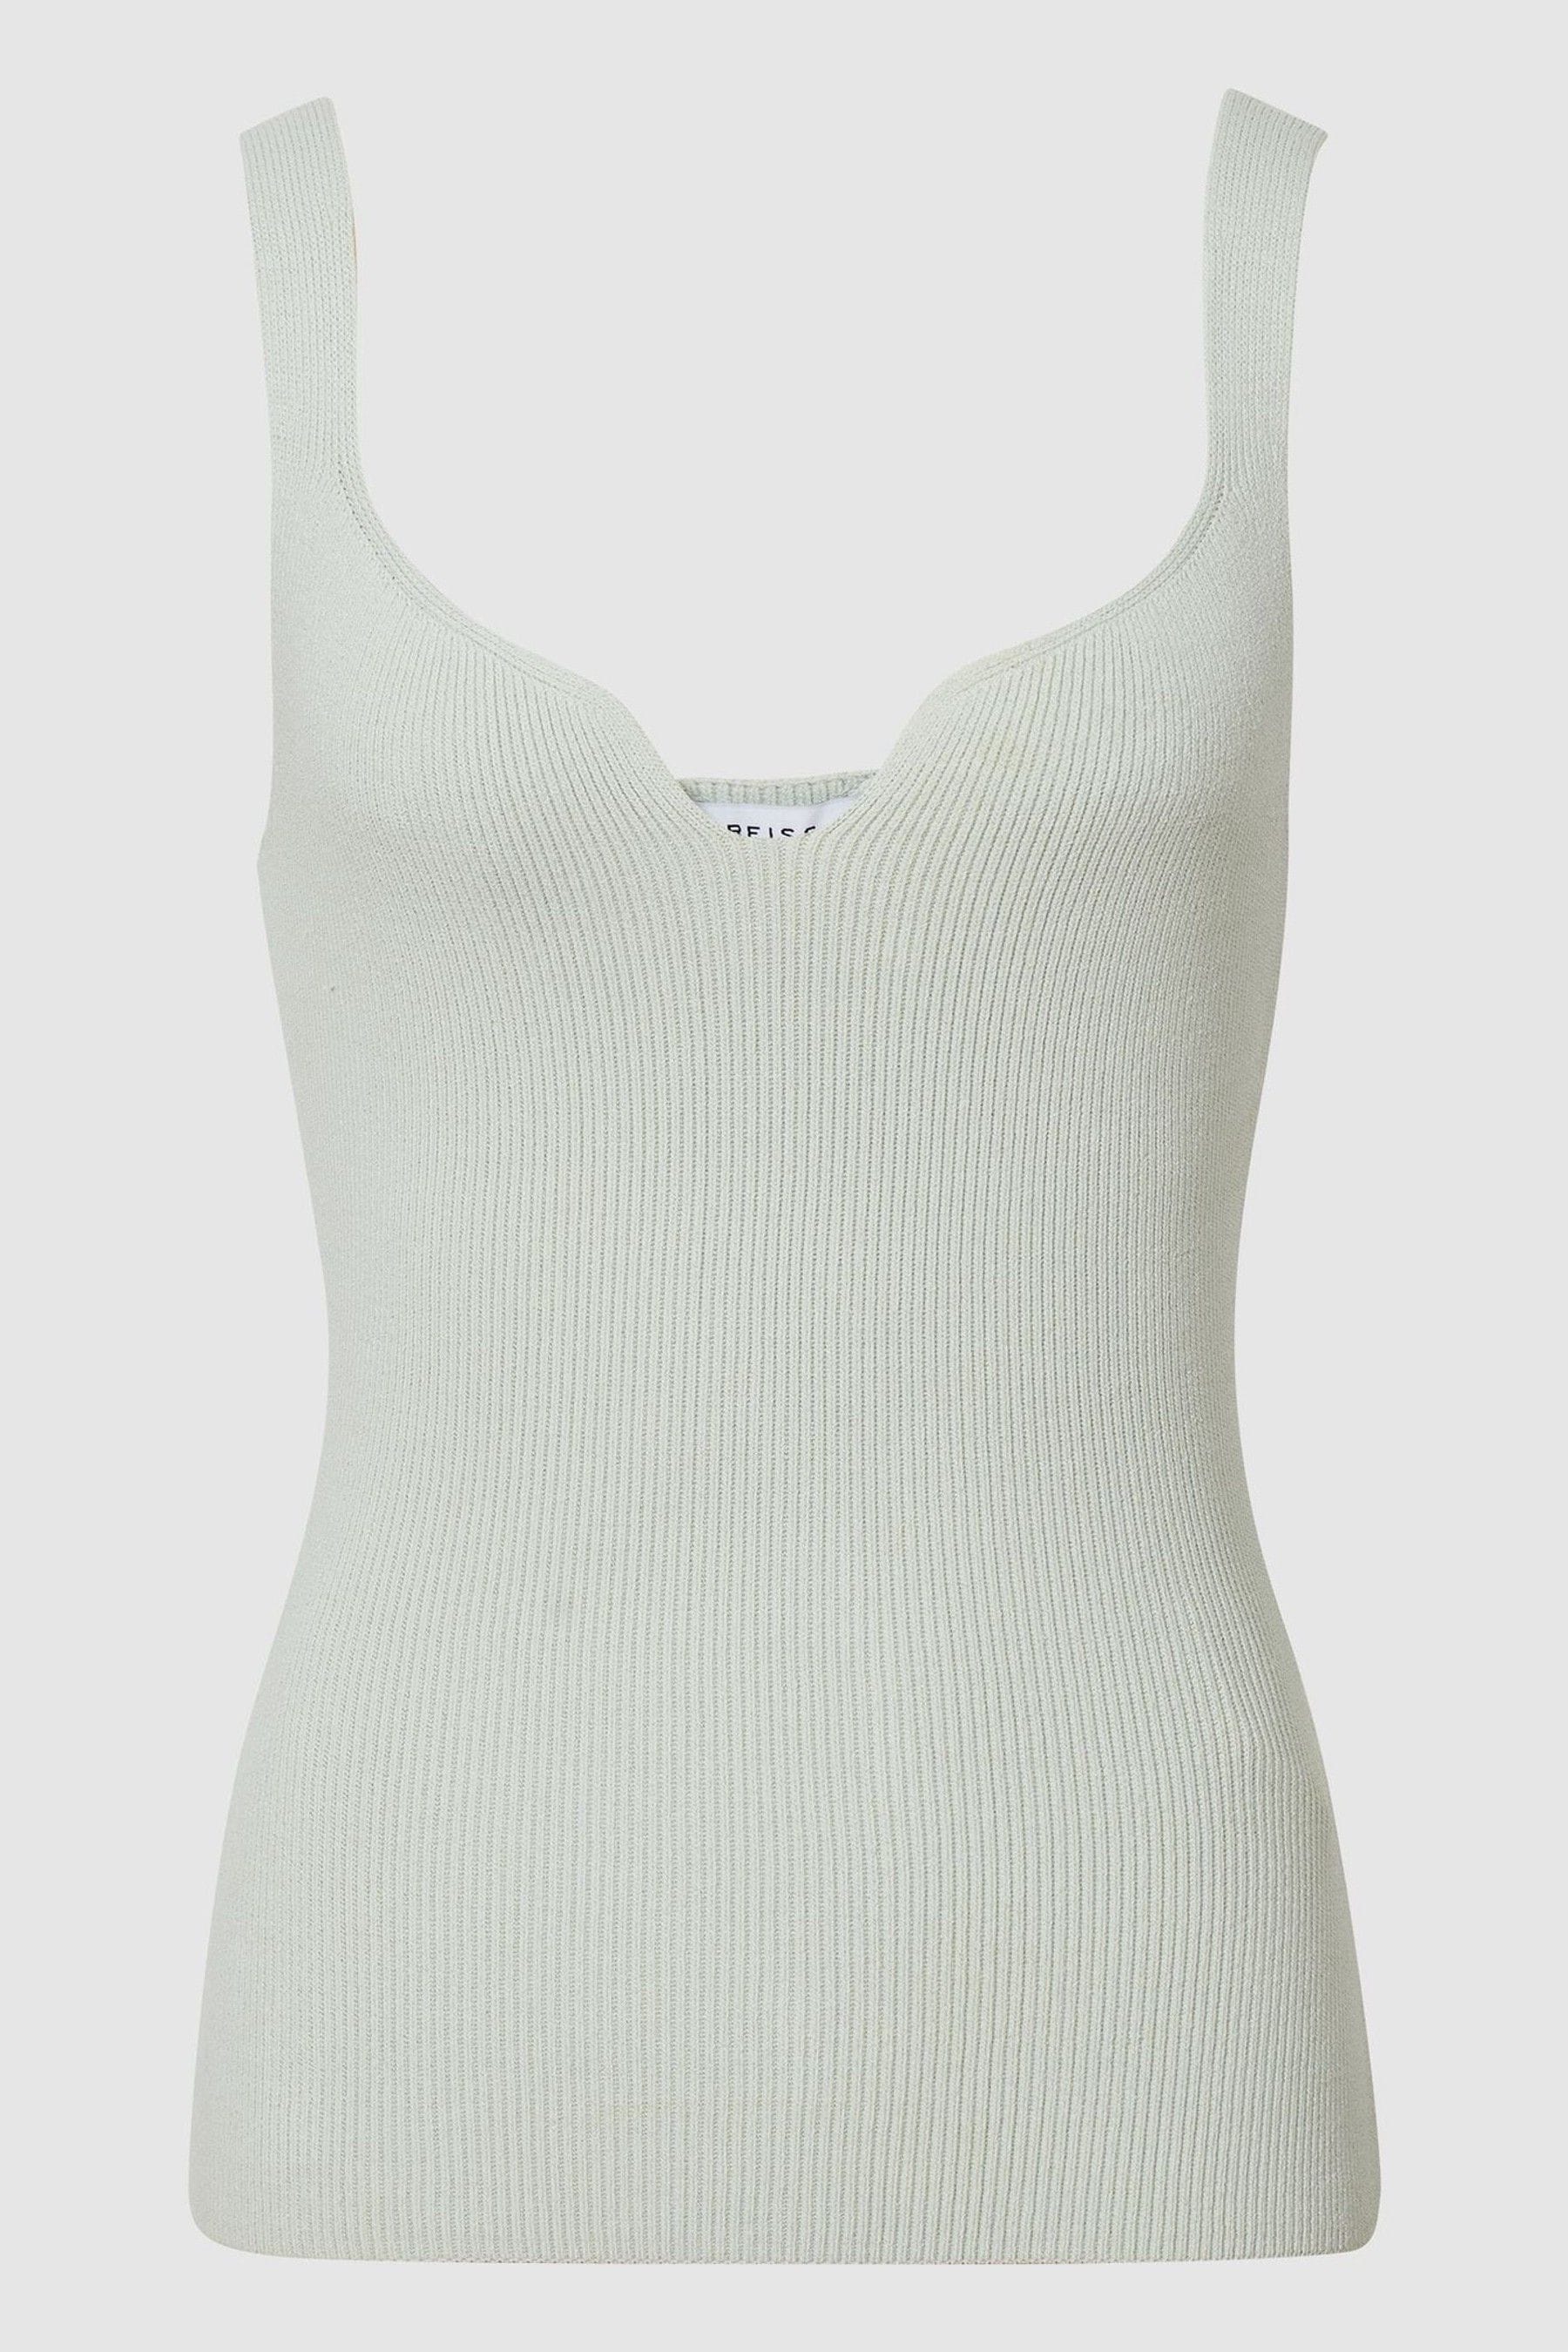 Buy Reiss Daisy Sweetheart Neck Top from the Next UK online shop